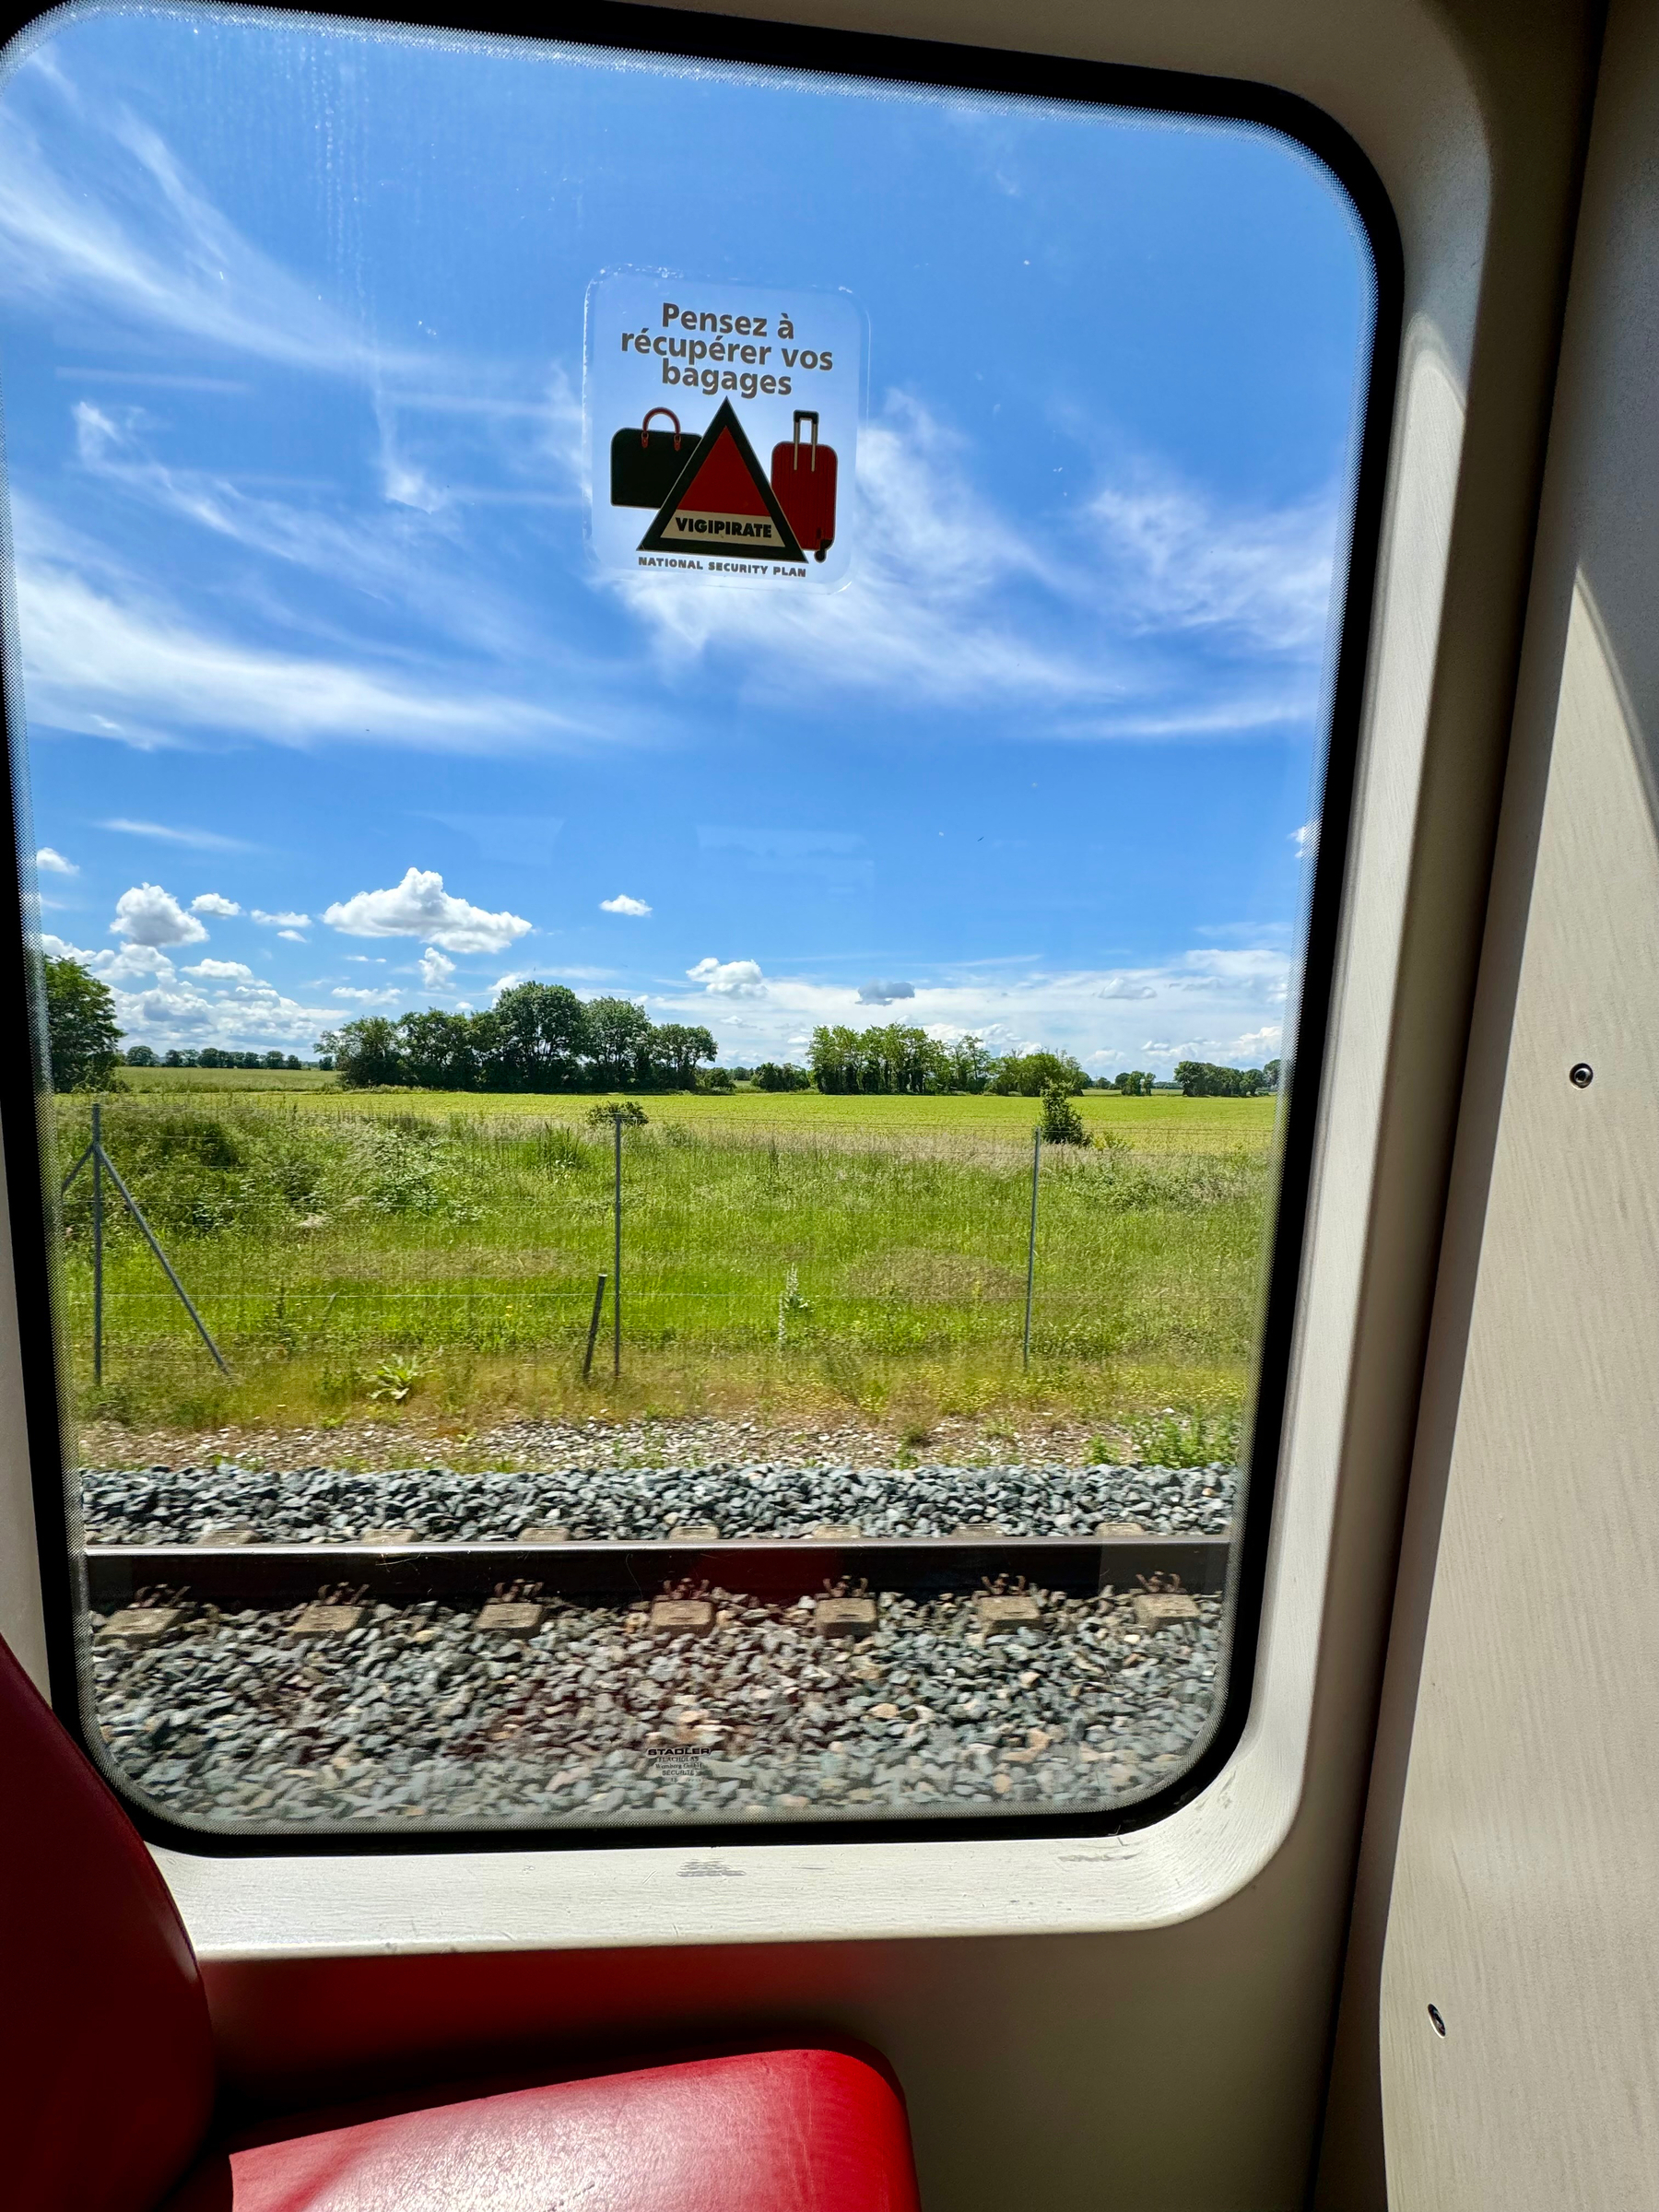 View from inside a train with a window sticker reminding passengers to collect their luggage, featuring the logo “Vigipirate,” the French national security alert system. Beyond the window are train tracks, green fields, and a blue sky with clouds.